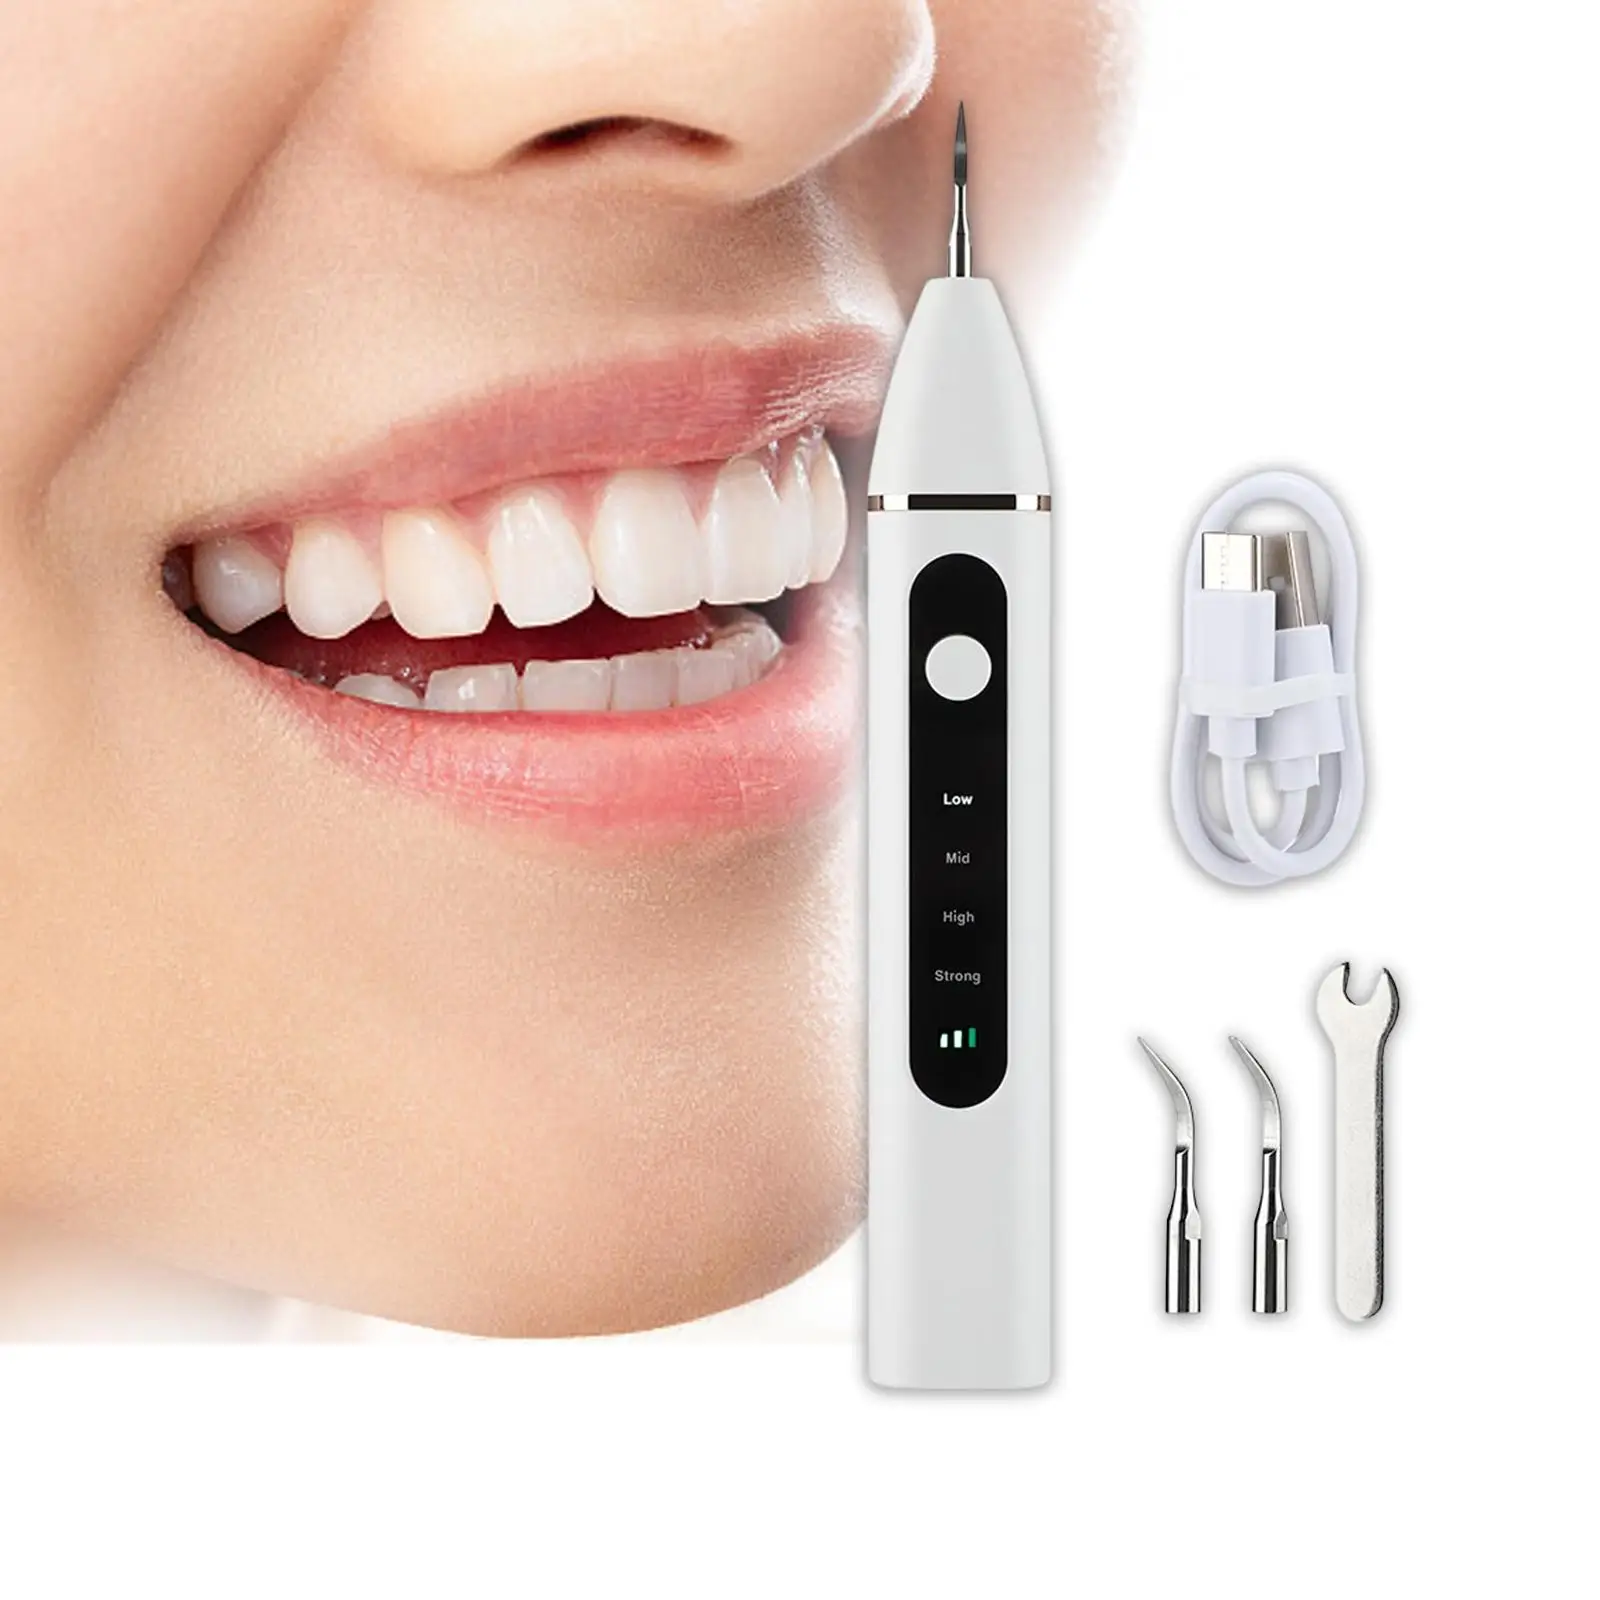 teeths Cleaning Toothbrush Visual IPX6 Irrigator teeths Stain tooth Cleaner for Home Travel